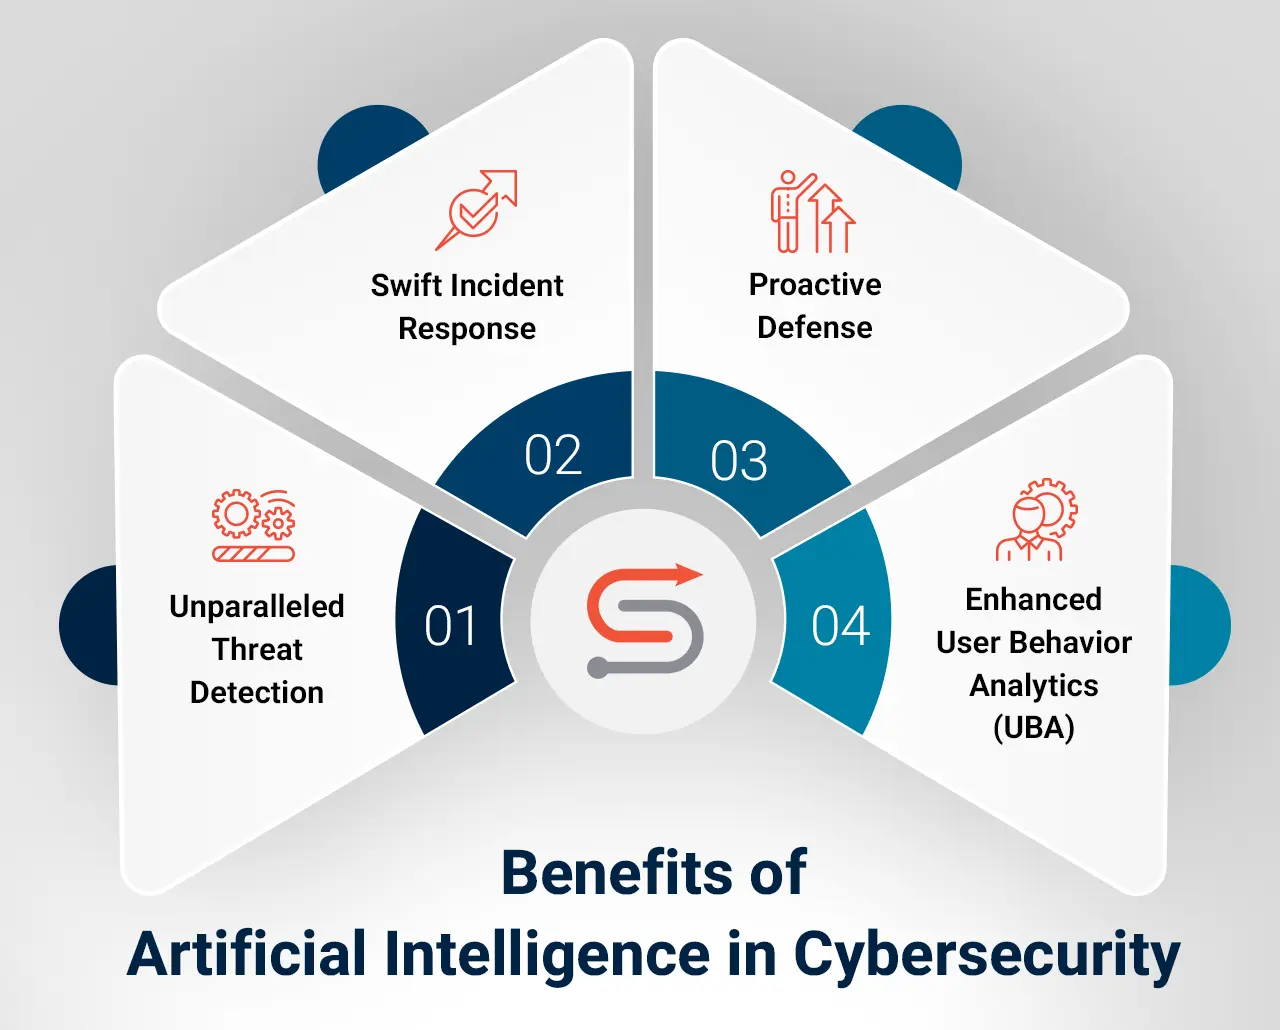 Benefits of Artificial Intelligence in Cybersecurity